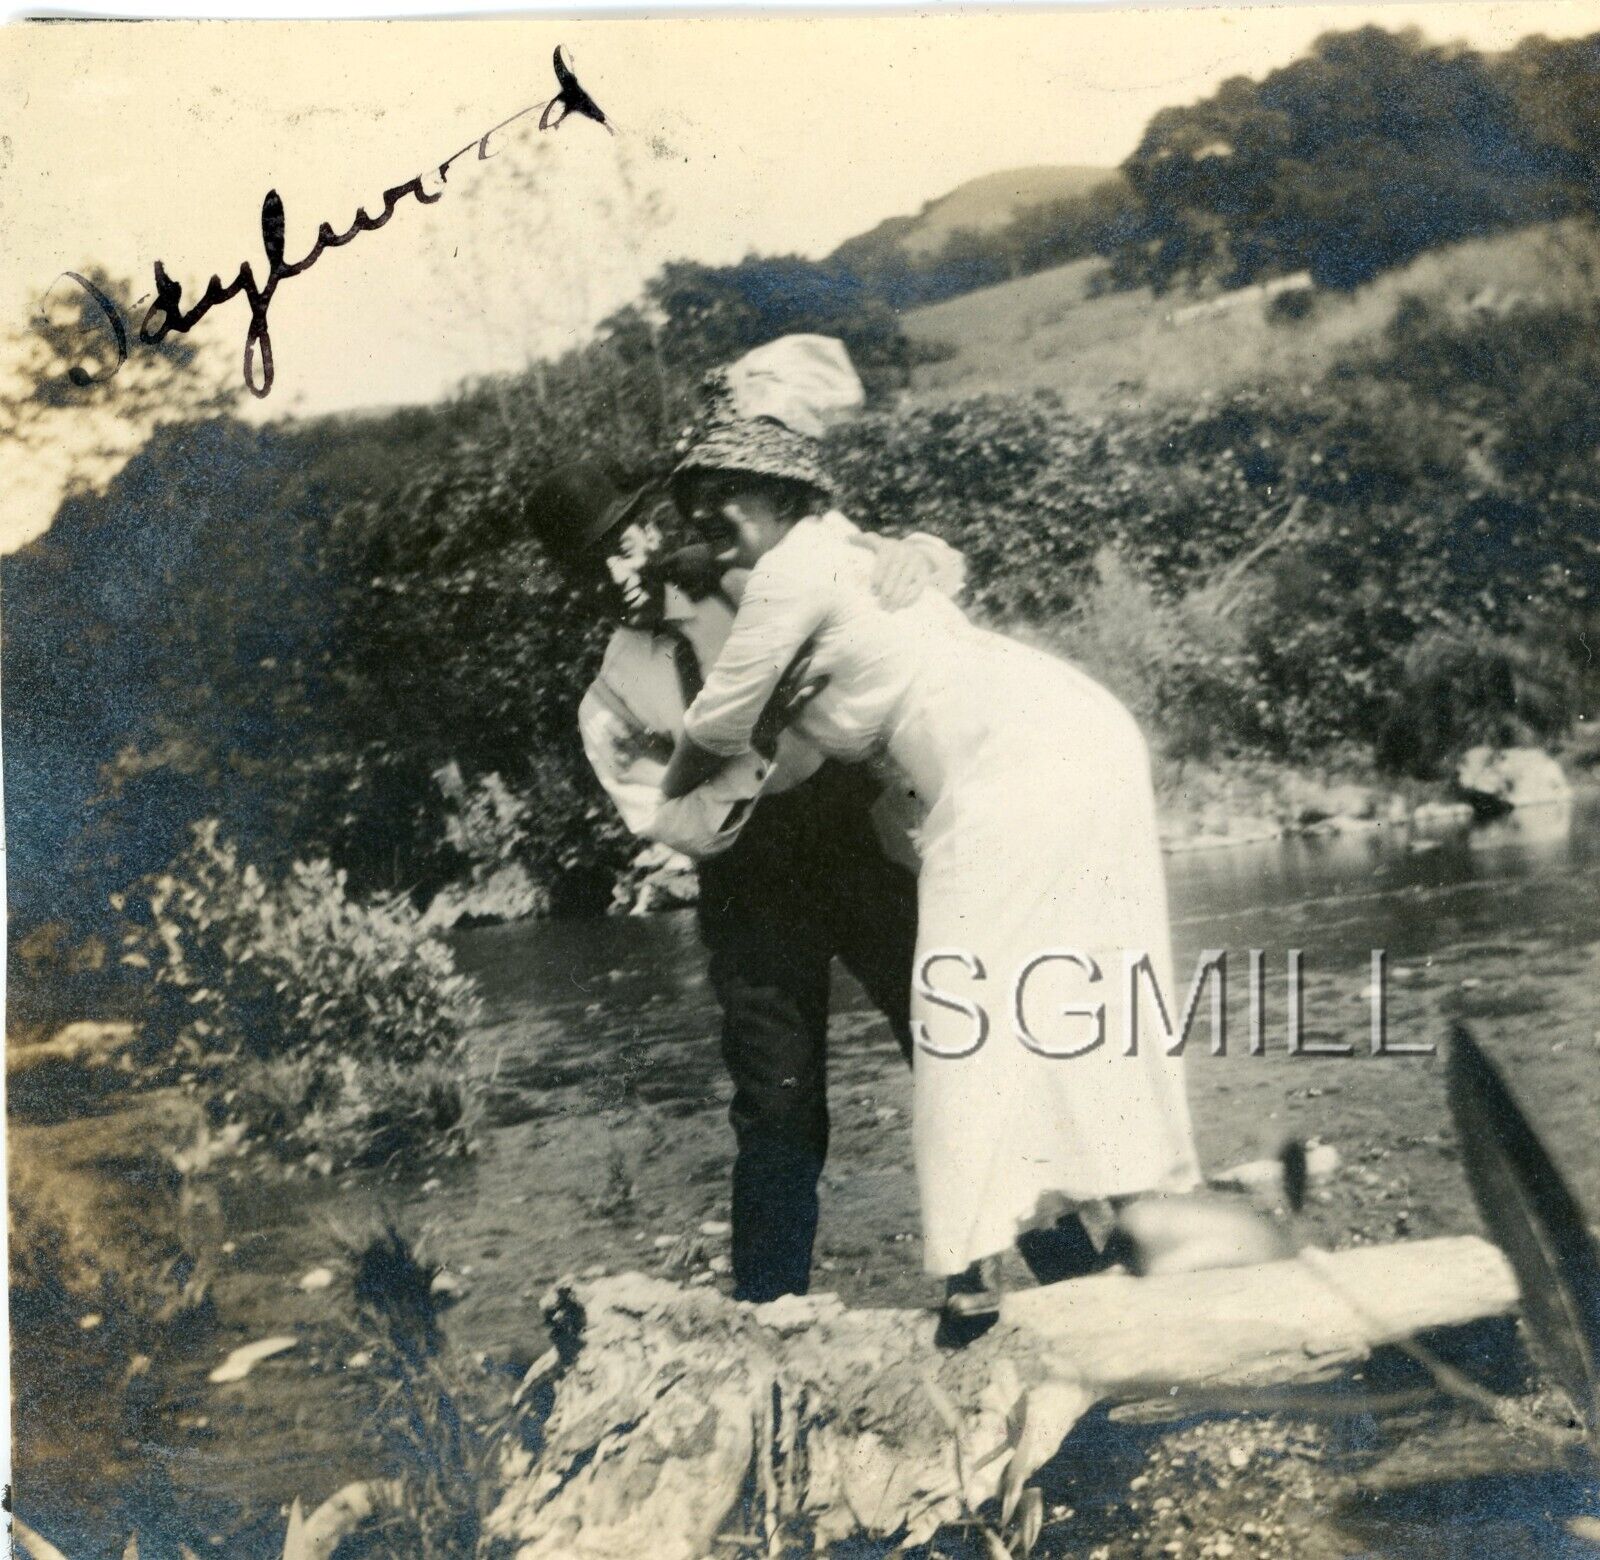 B29 Antique Photo Idyllwild CA Couple Smiling Trying to Balance on a Rock